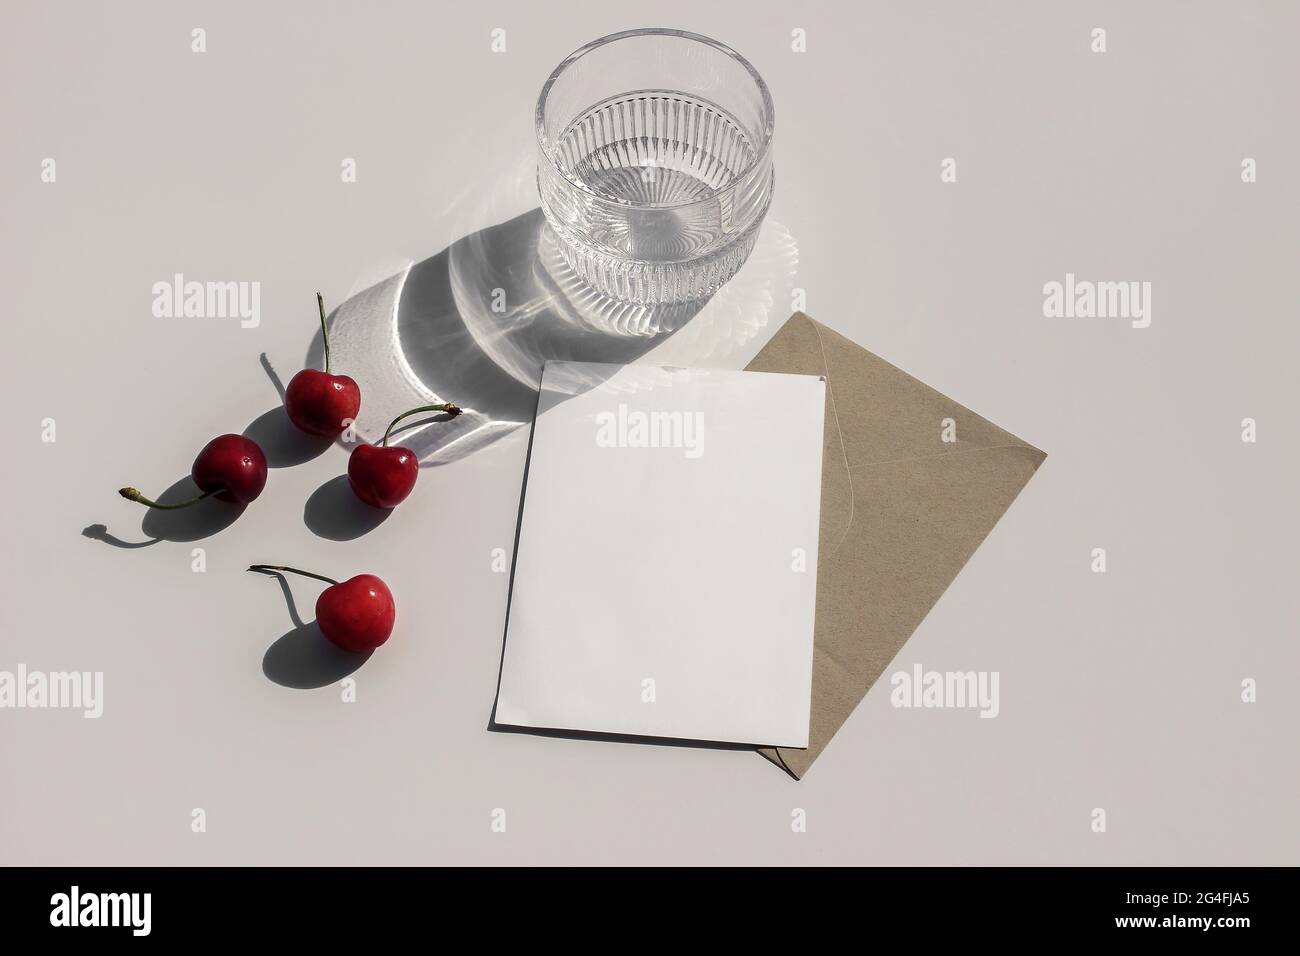 Summer food still life composition. Red cherries fruit on beige table background. Stationery mock up scene. Blank greeting card, invitation, glass of Stock Photo